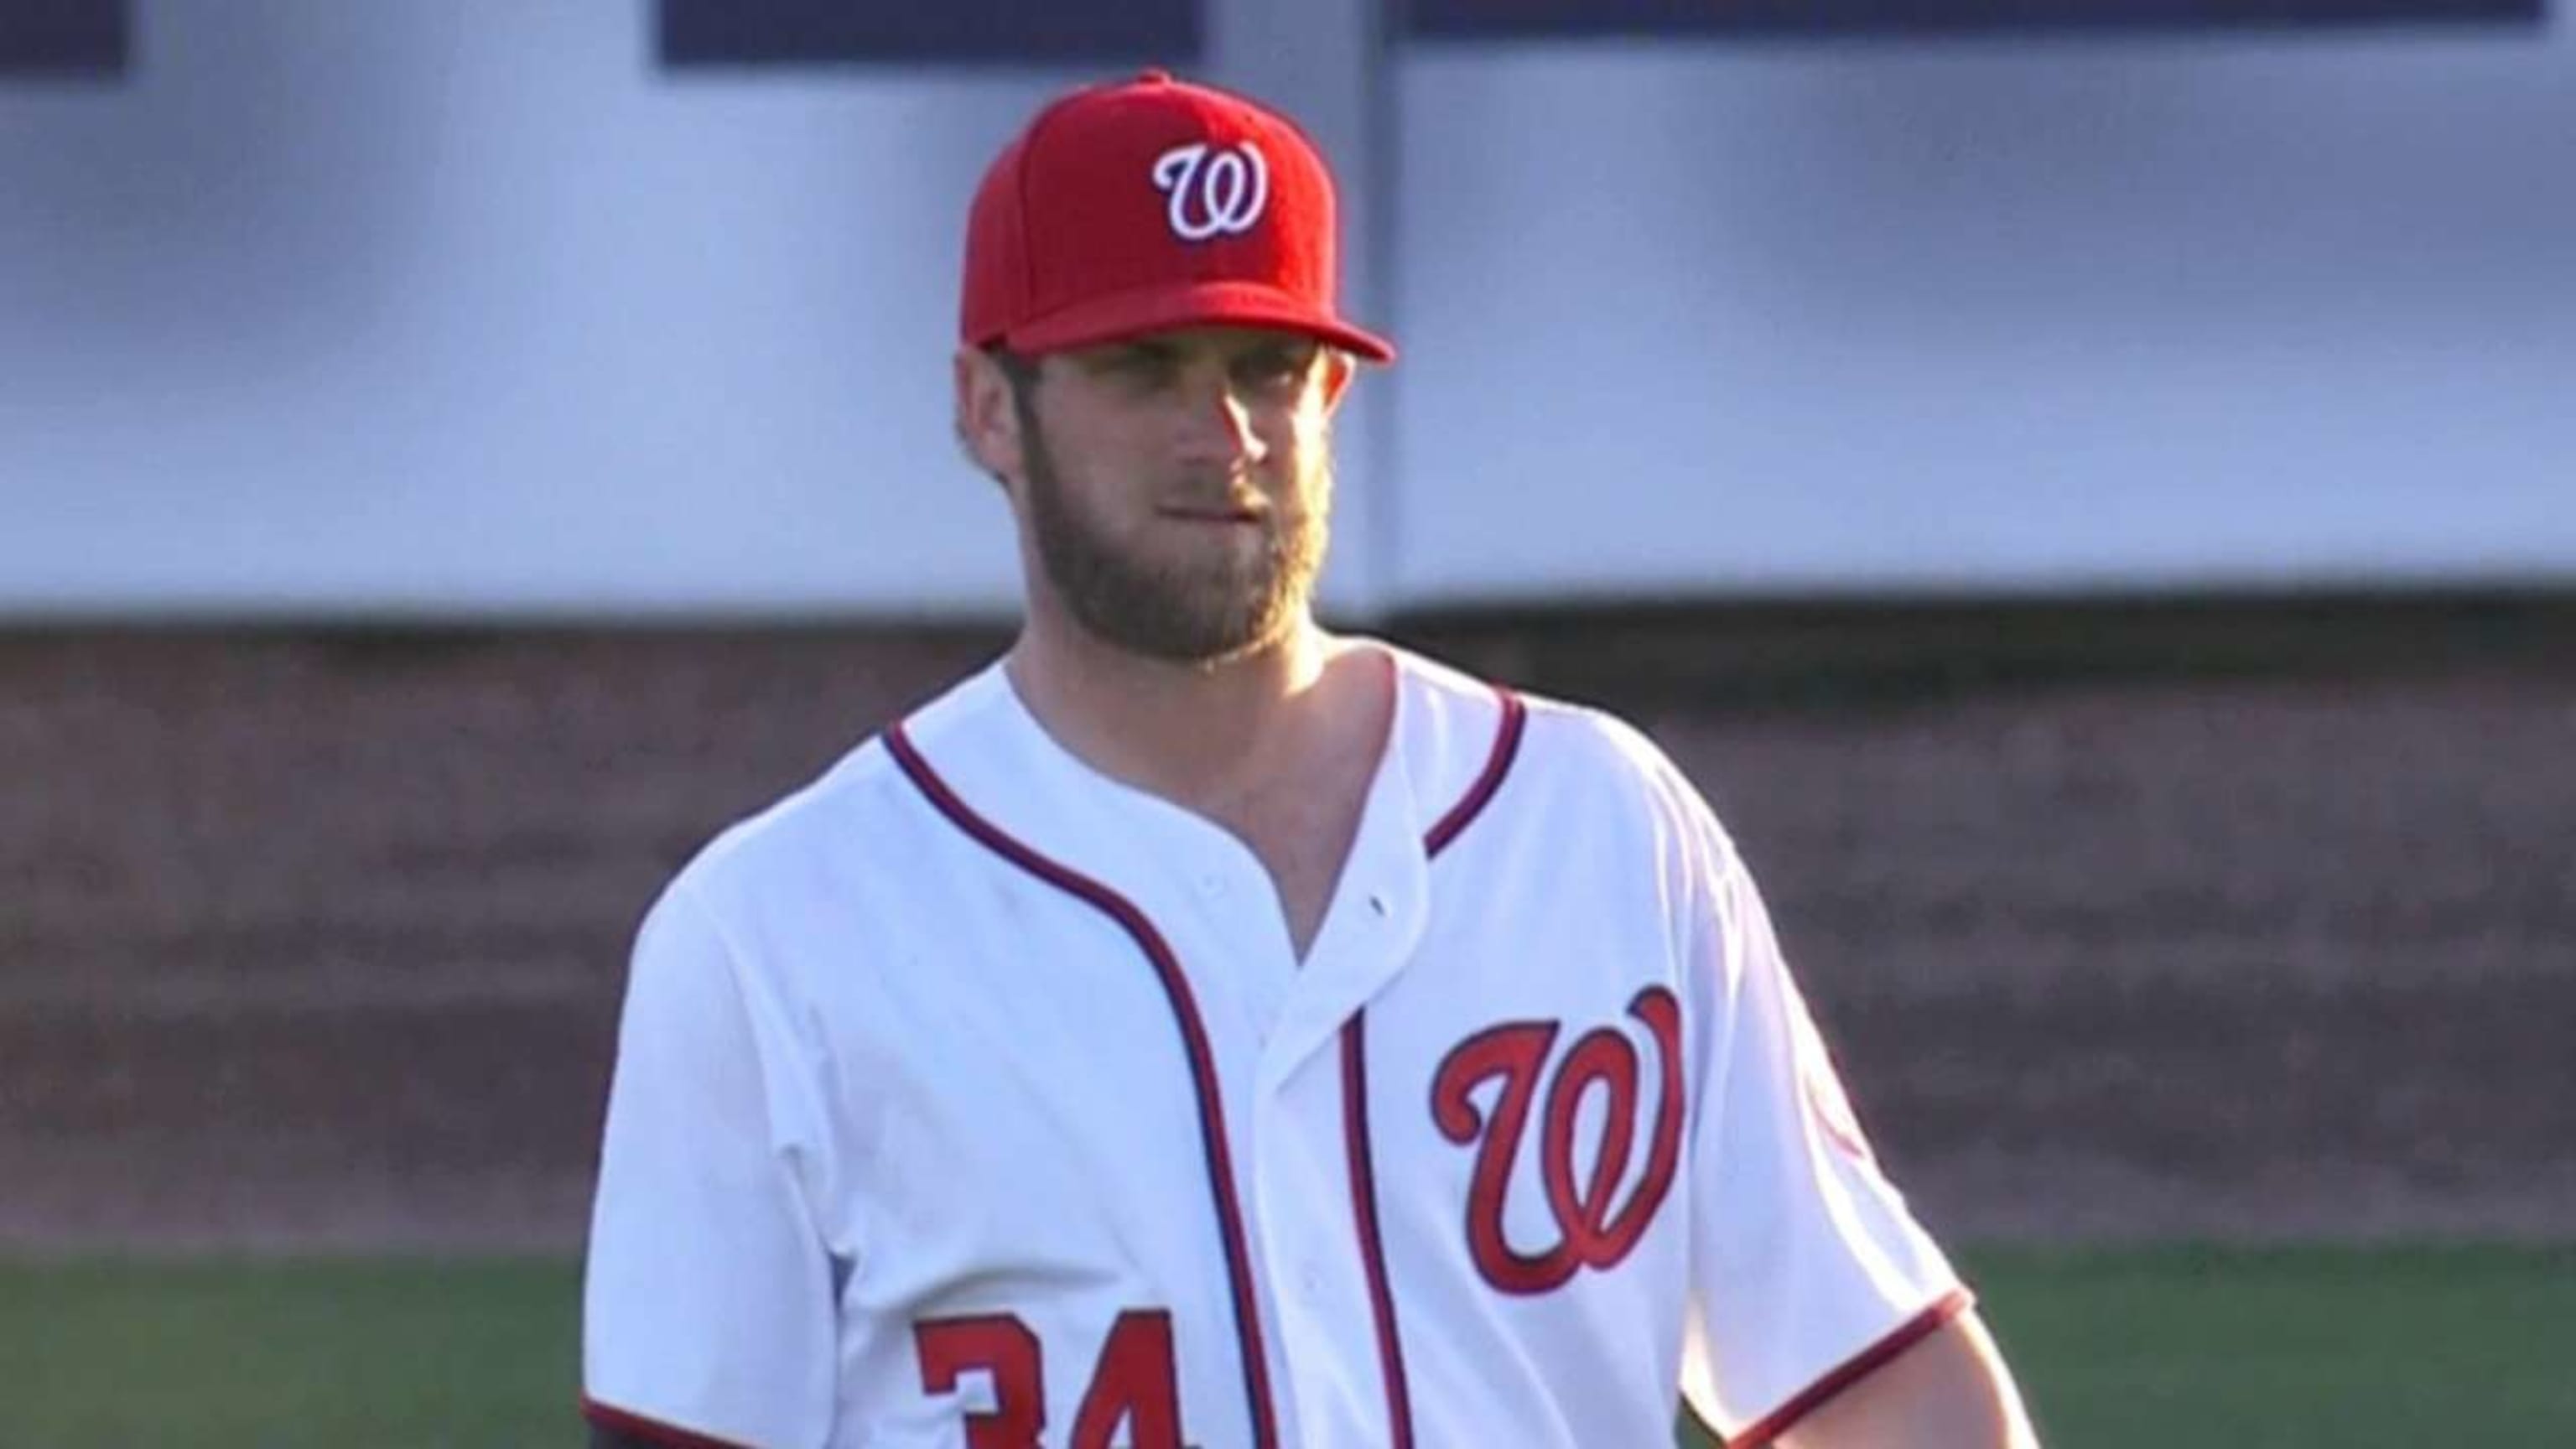 Bryce Harper used Kris Bryant's bat Monday, but don't count on the